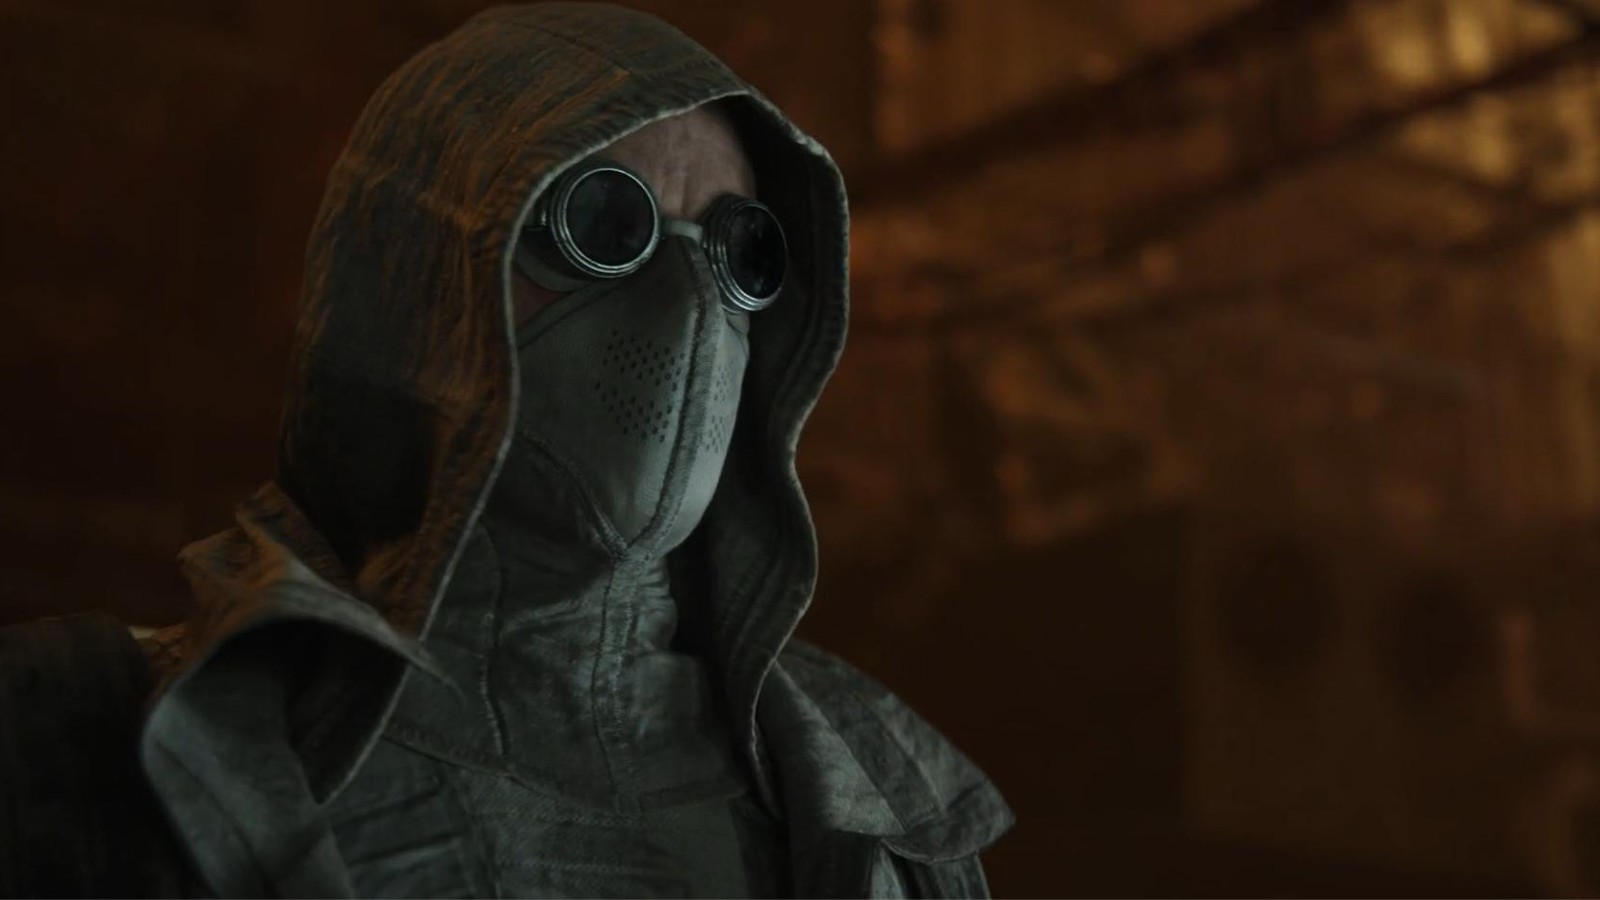 Screenshot from the animated tv series Love, Death & Robots. This still is from the episode Snow in the Desert. Here we see a close up of a masked man wearing round googles with his hood up to protect him from his desert surroundings.